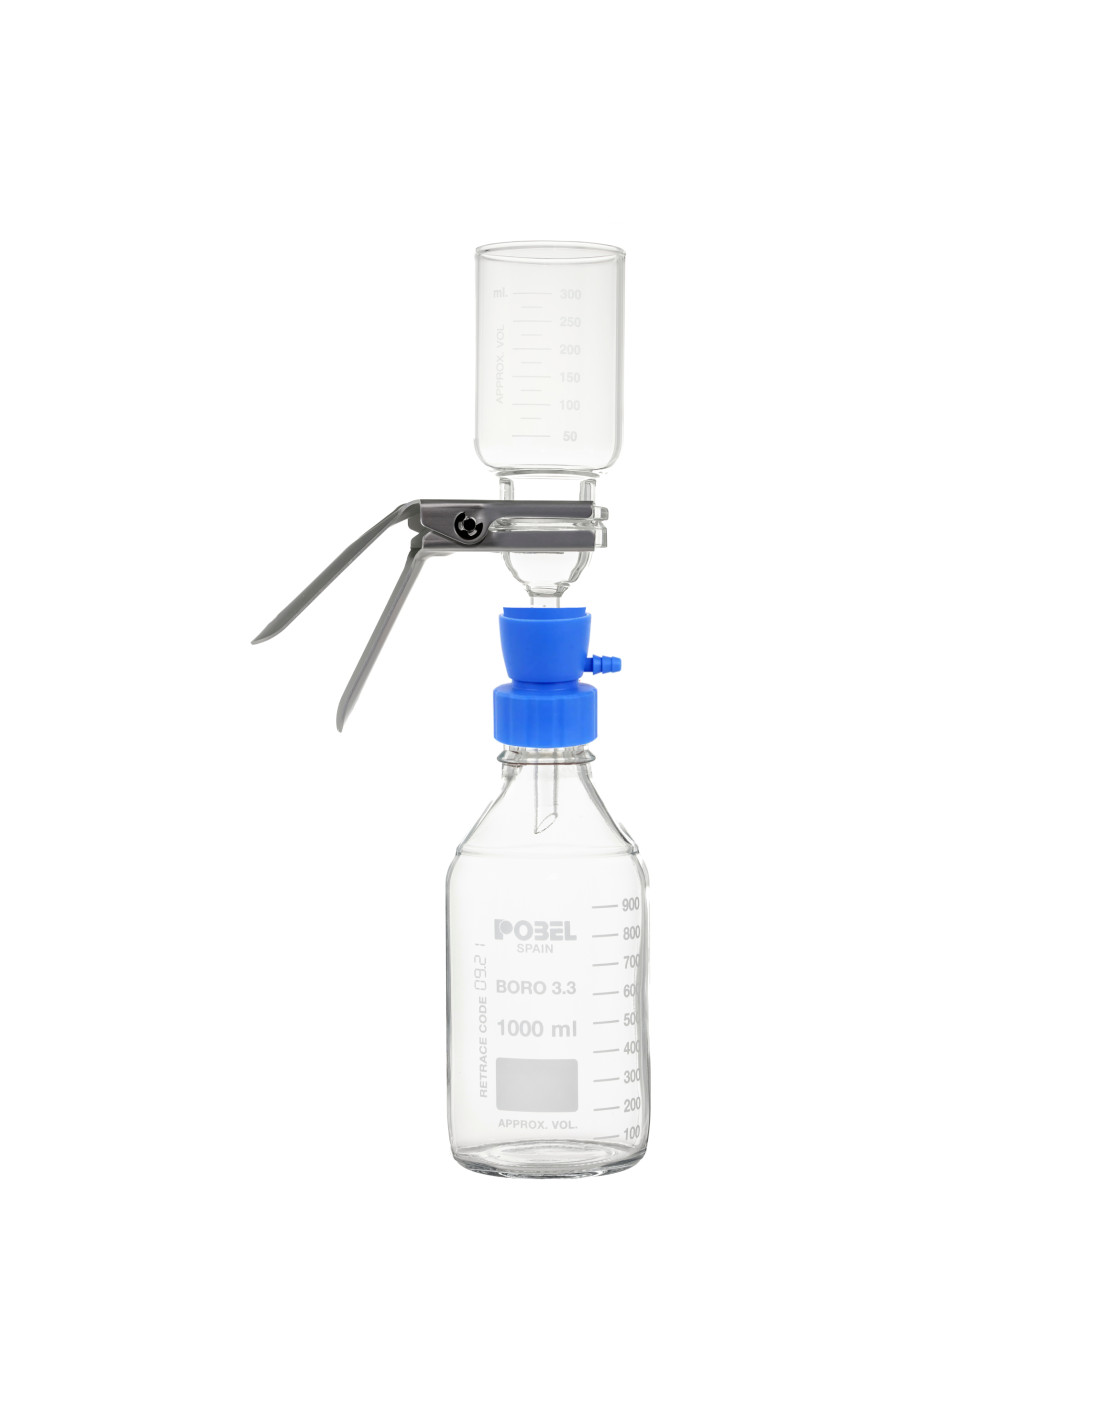 FILTRATION SET WITH BOTTLE, FILTER HOLDER AND GL-45 ADAPTER WITH OLIVE